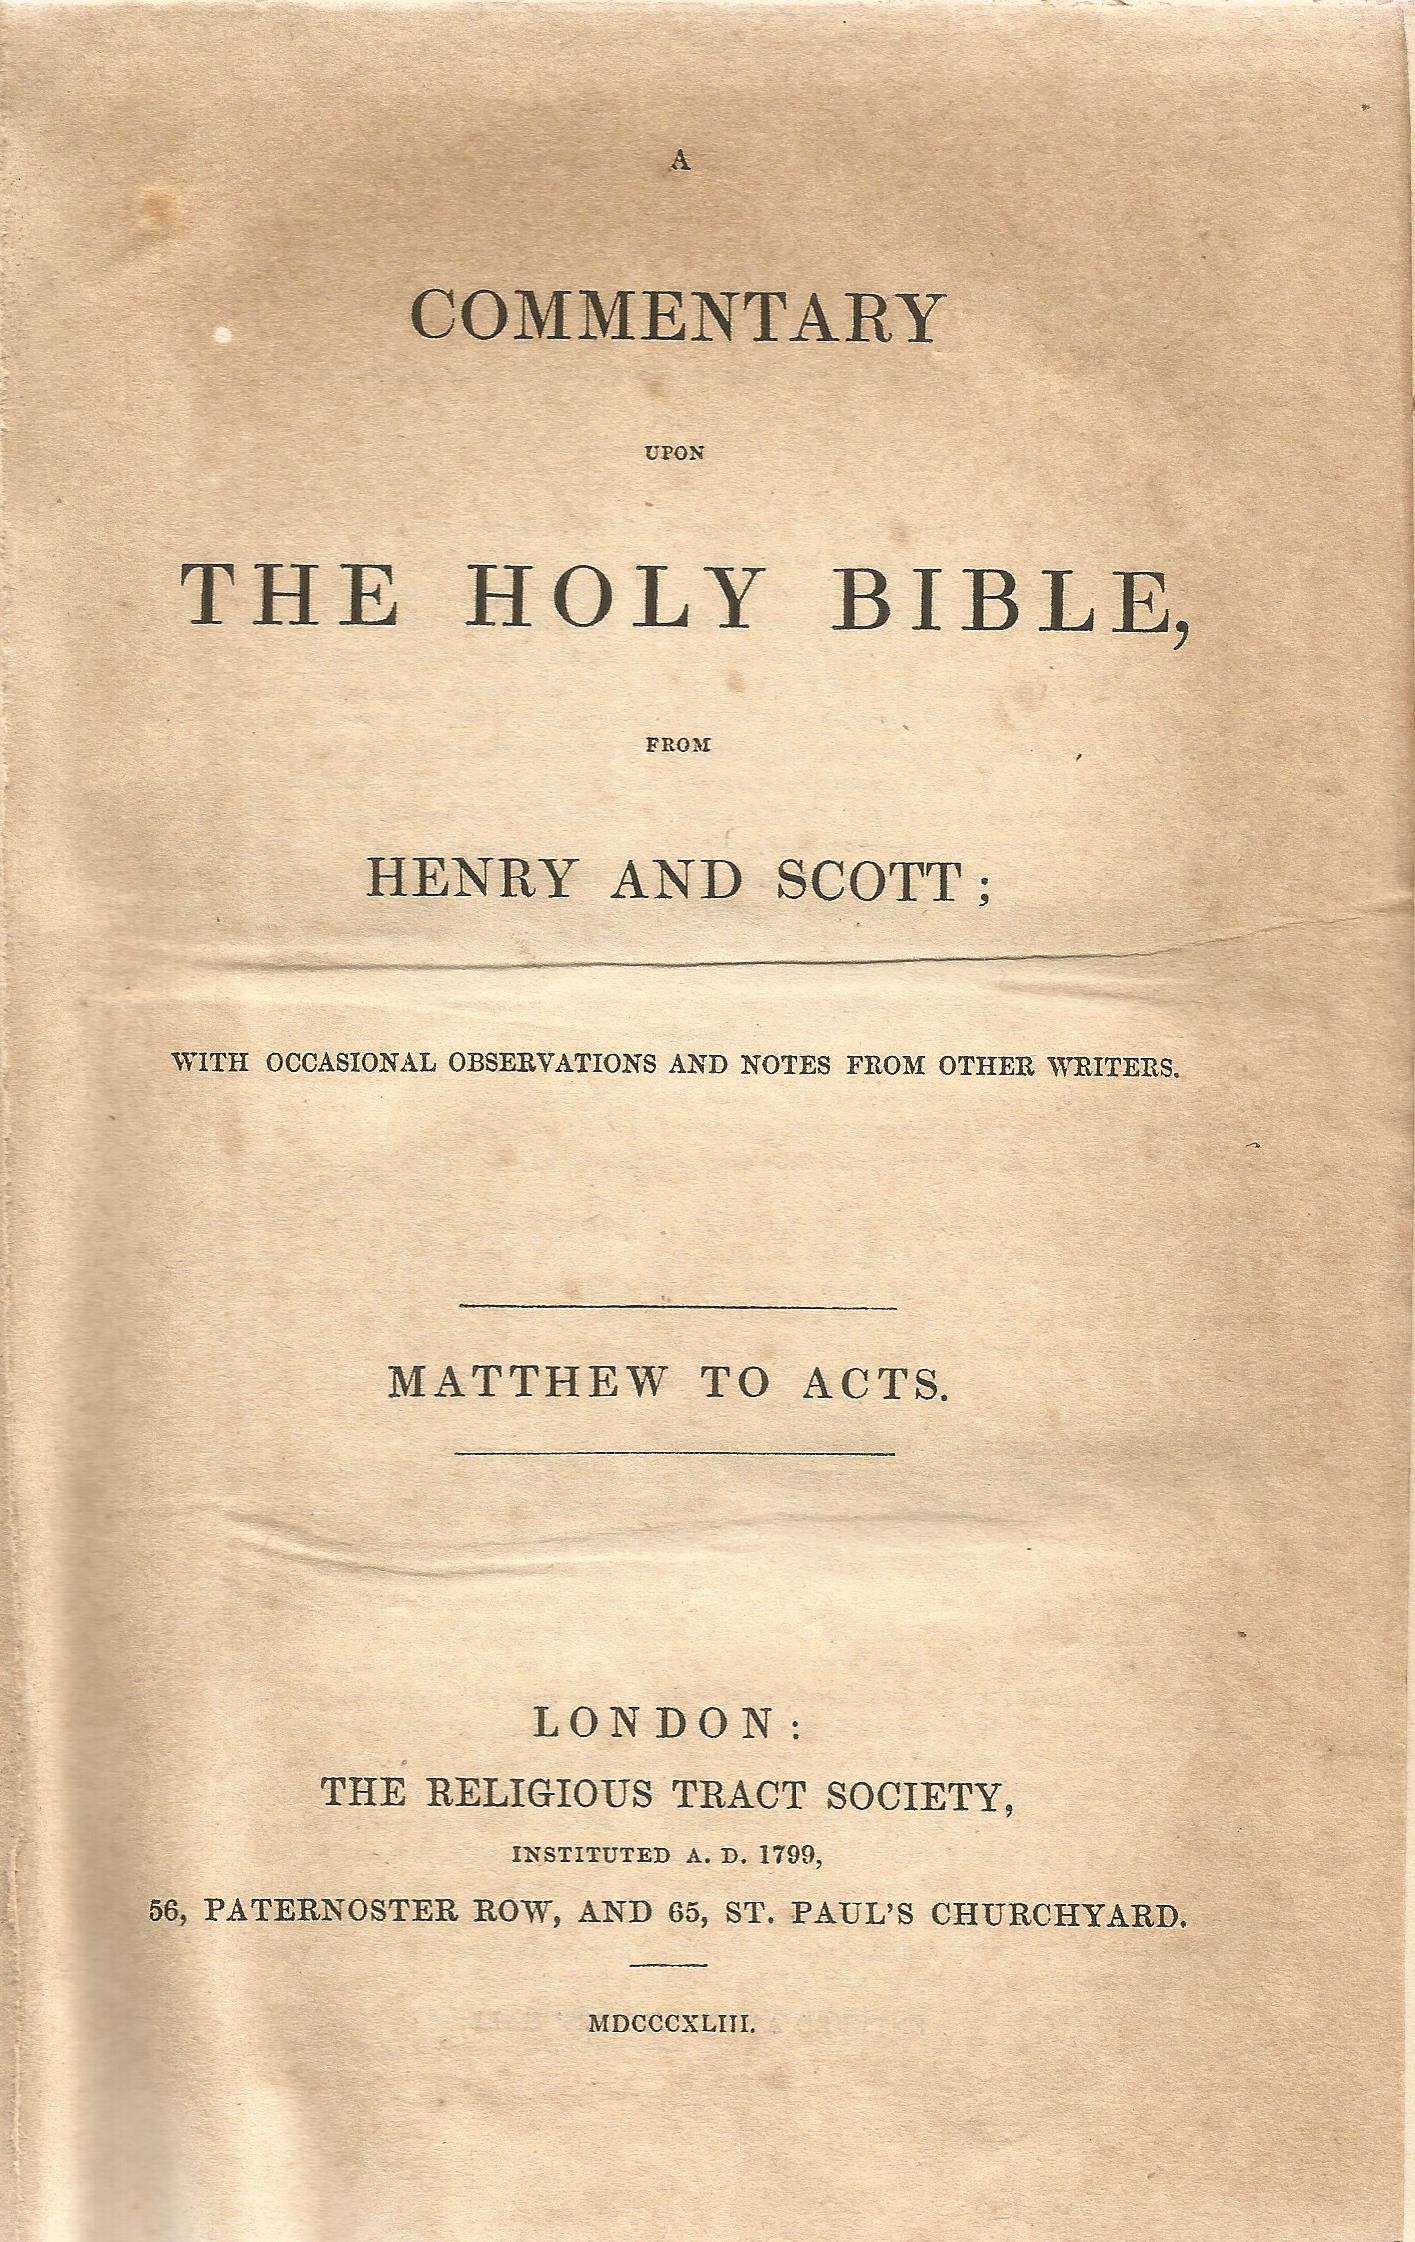 A Commentary from The Holy Bible Matthew to Acts from Henry and Scott 1843 published by The - Image 2 of 2